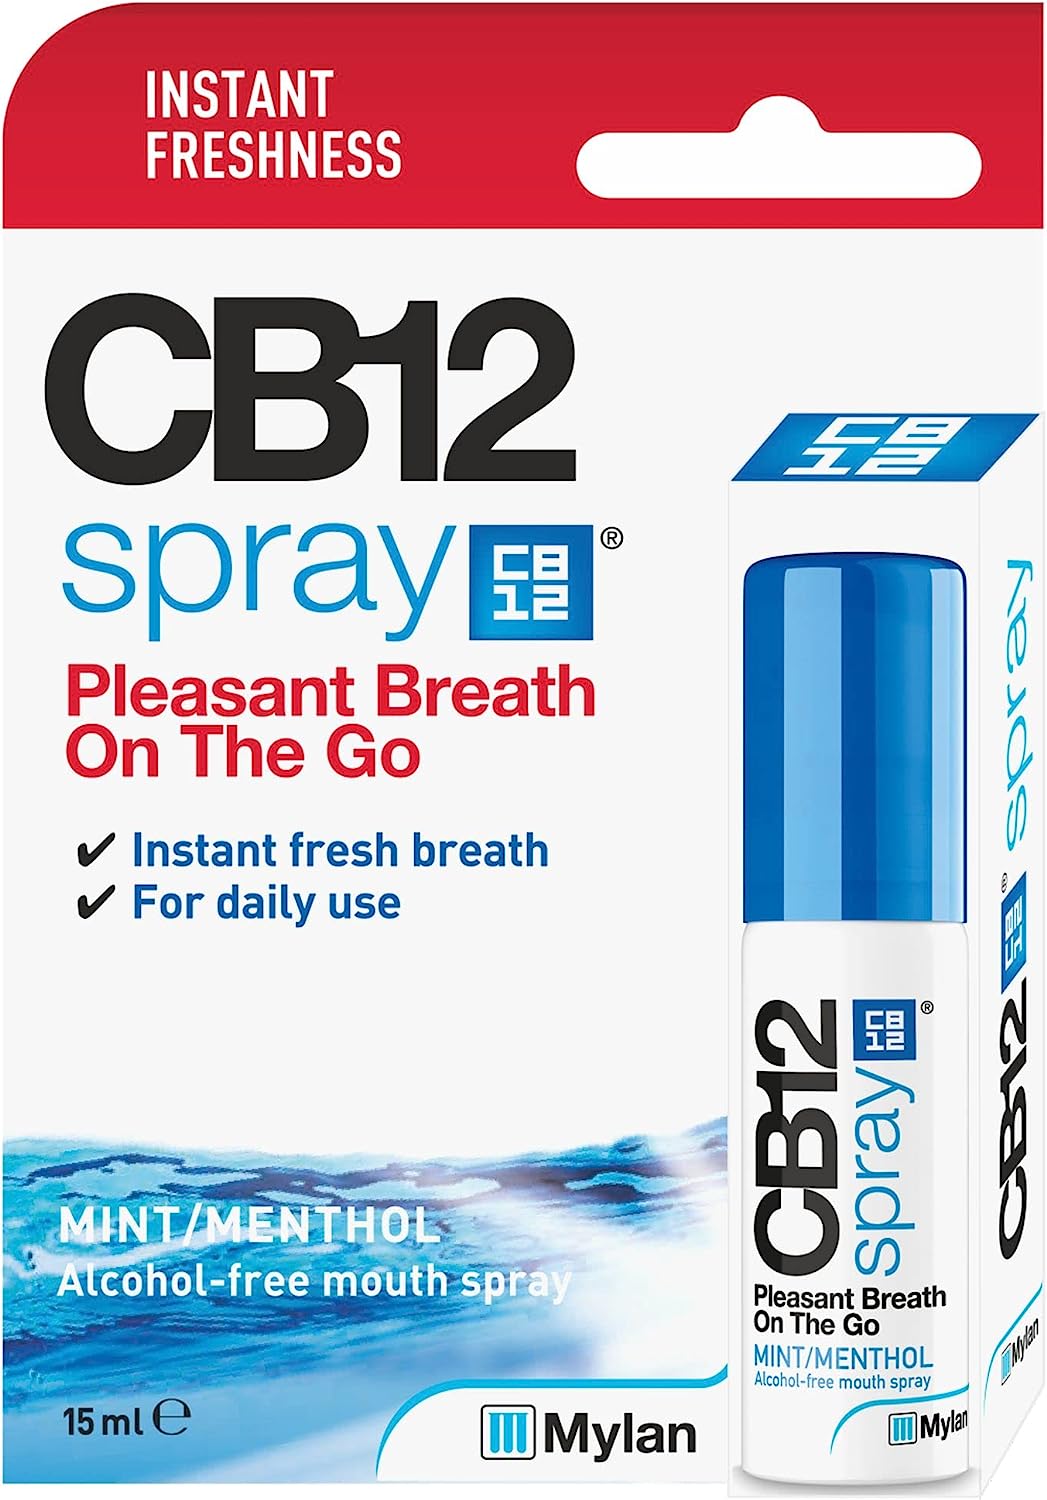 CB 12 Spray Instant Freshness on the Go Mint Flavour 15ml RRP £3.44 CLEARANCE XL £2.50